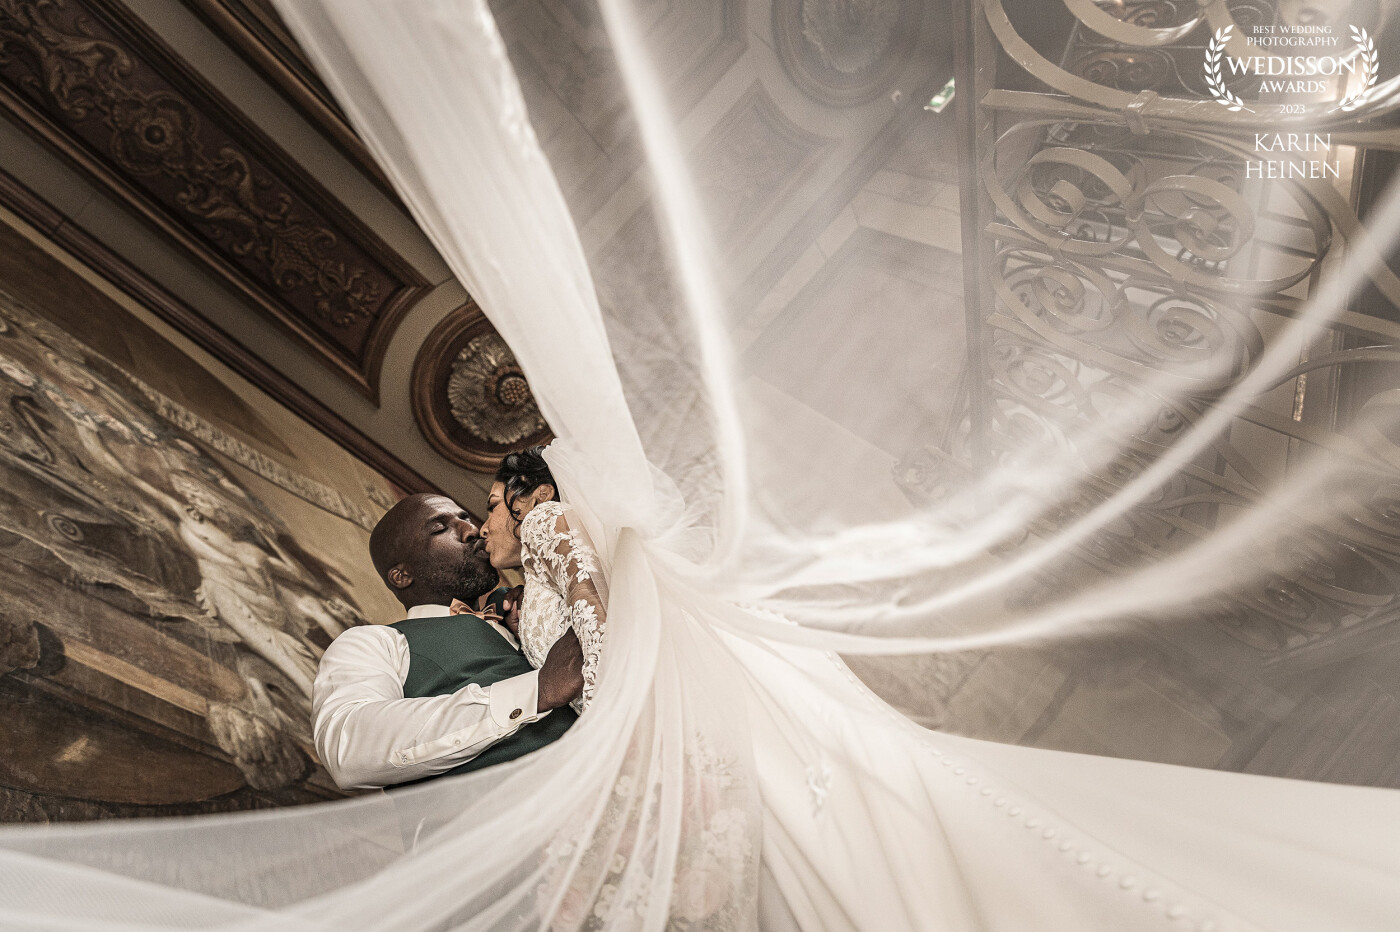 O&V celebrated their wedding at one of the most unique and exclusive wedding venues in the Netherlands. The grand hallway provides a classic stairway and looking up from the ground level the majestic painting of the ceiling is overwhelming. This upward view alongside the veil and the intense moment of the wedding couple resulted in this shot.